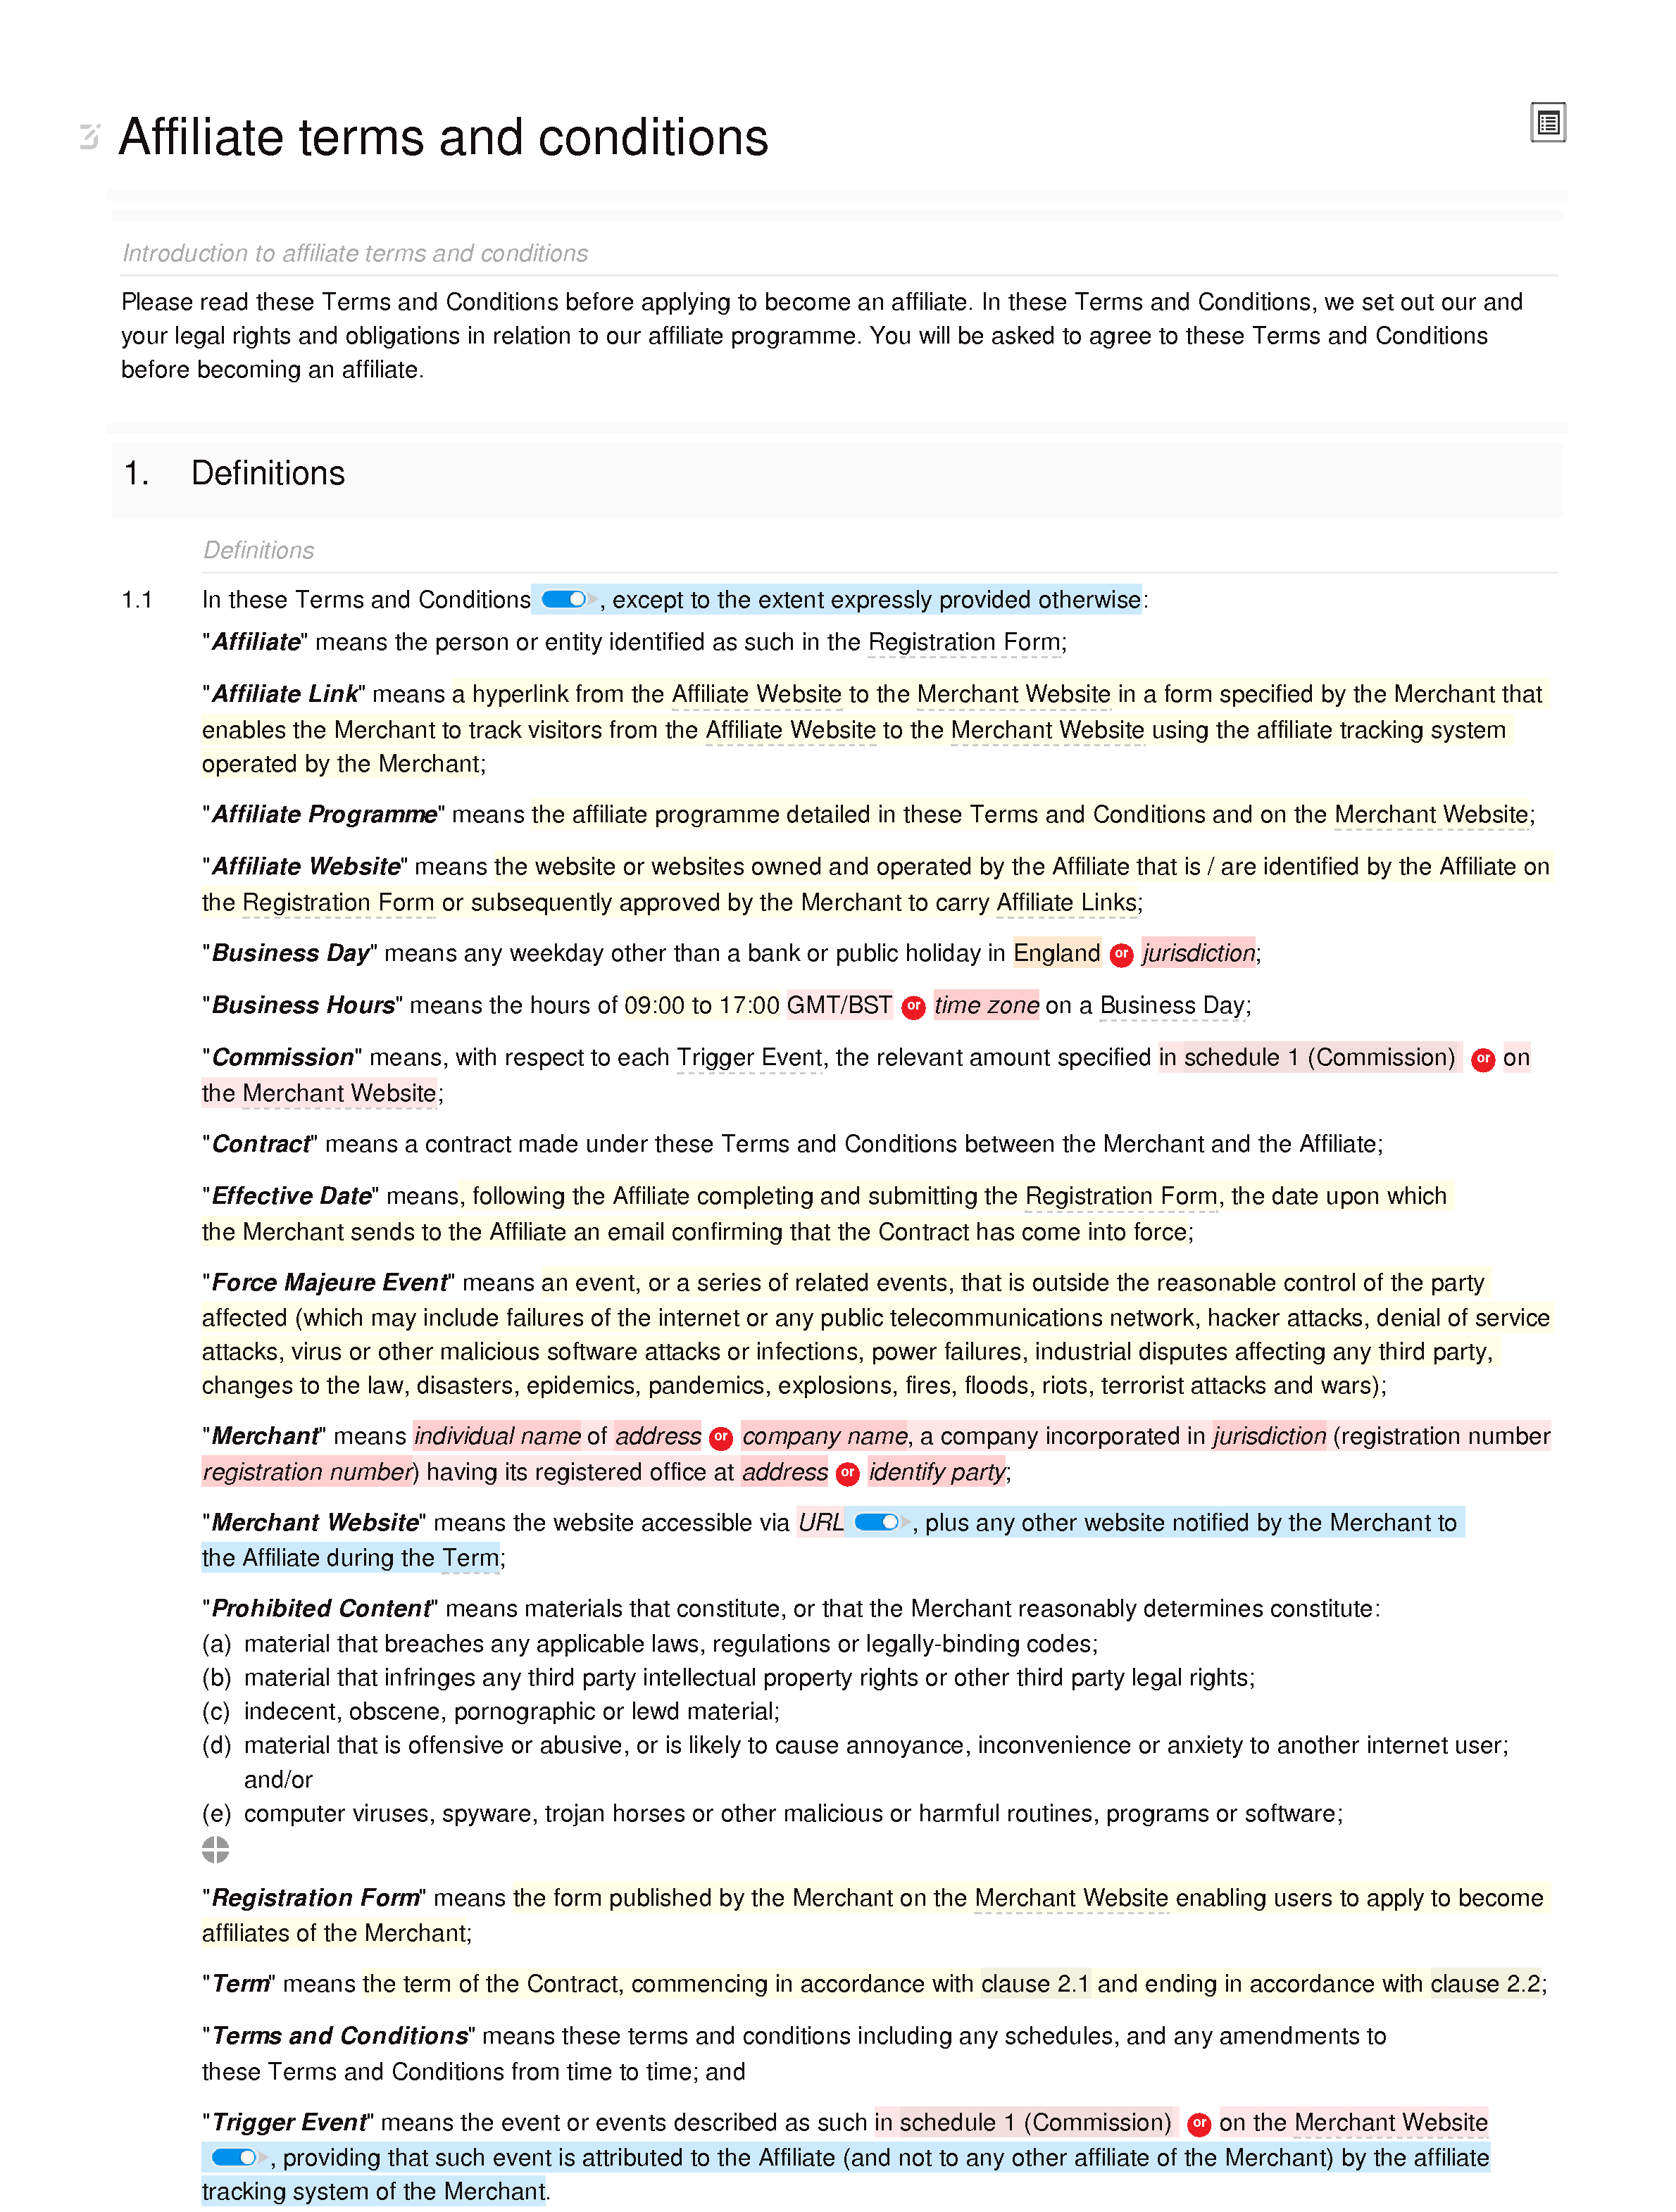 Affiliate terms and conditions (standard) document editor preview